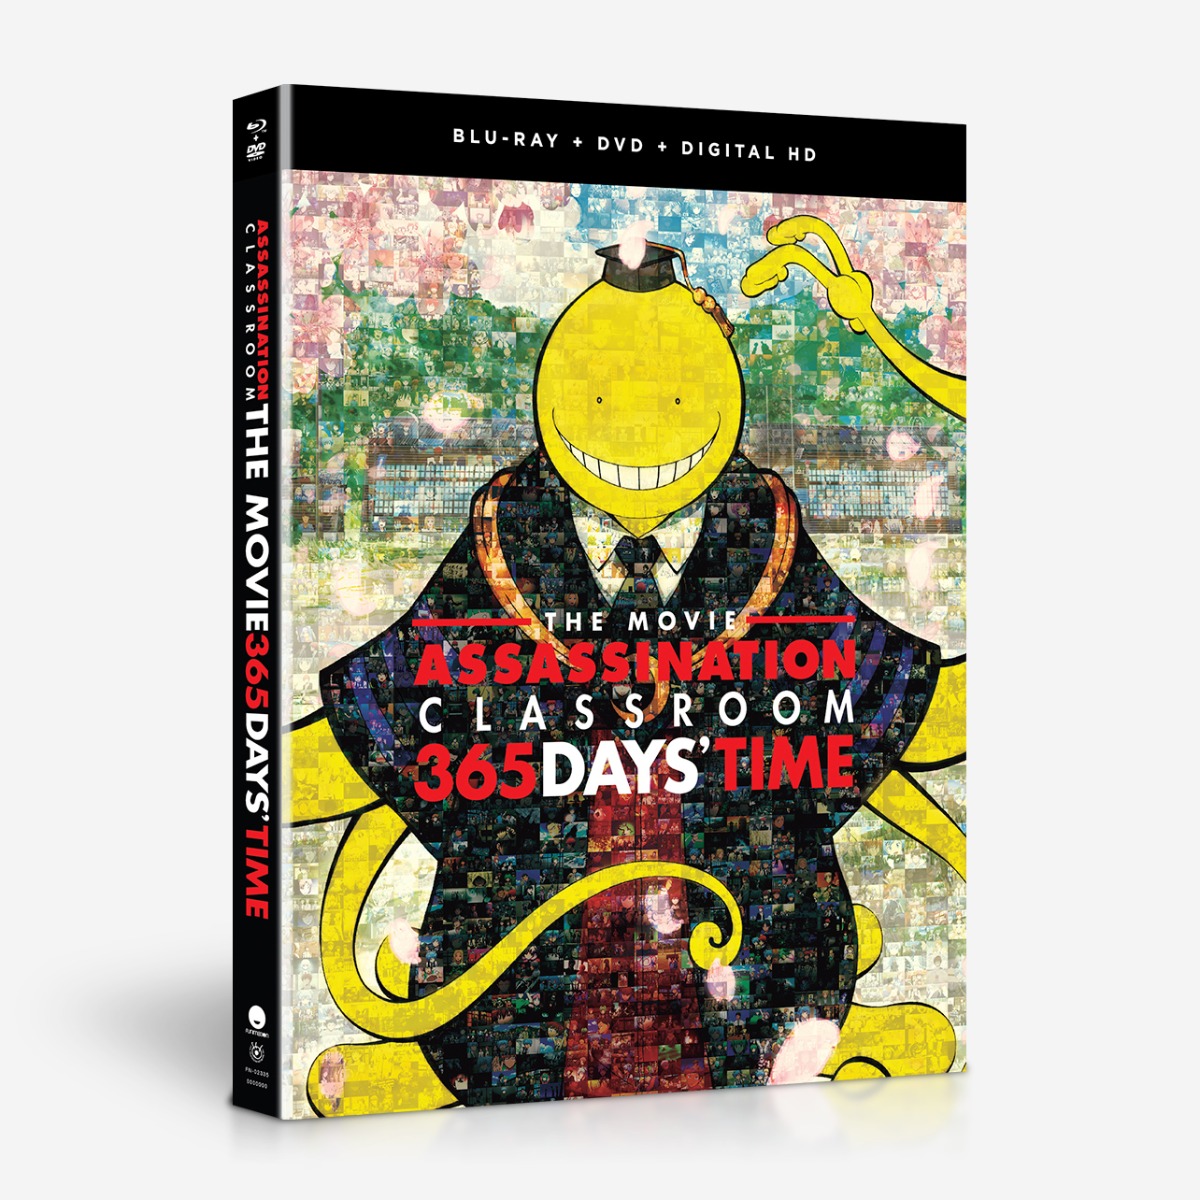 Assassination Classroom the Movie 365 Days' Time - Blu-ray + DVD image count 0